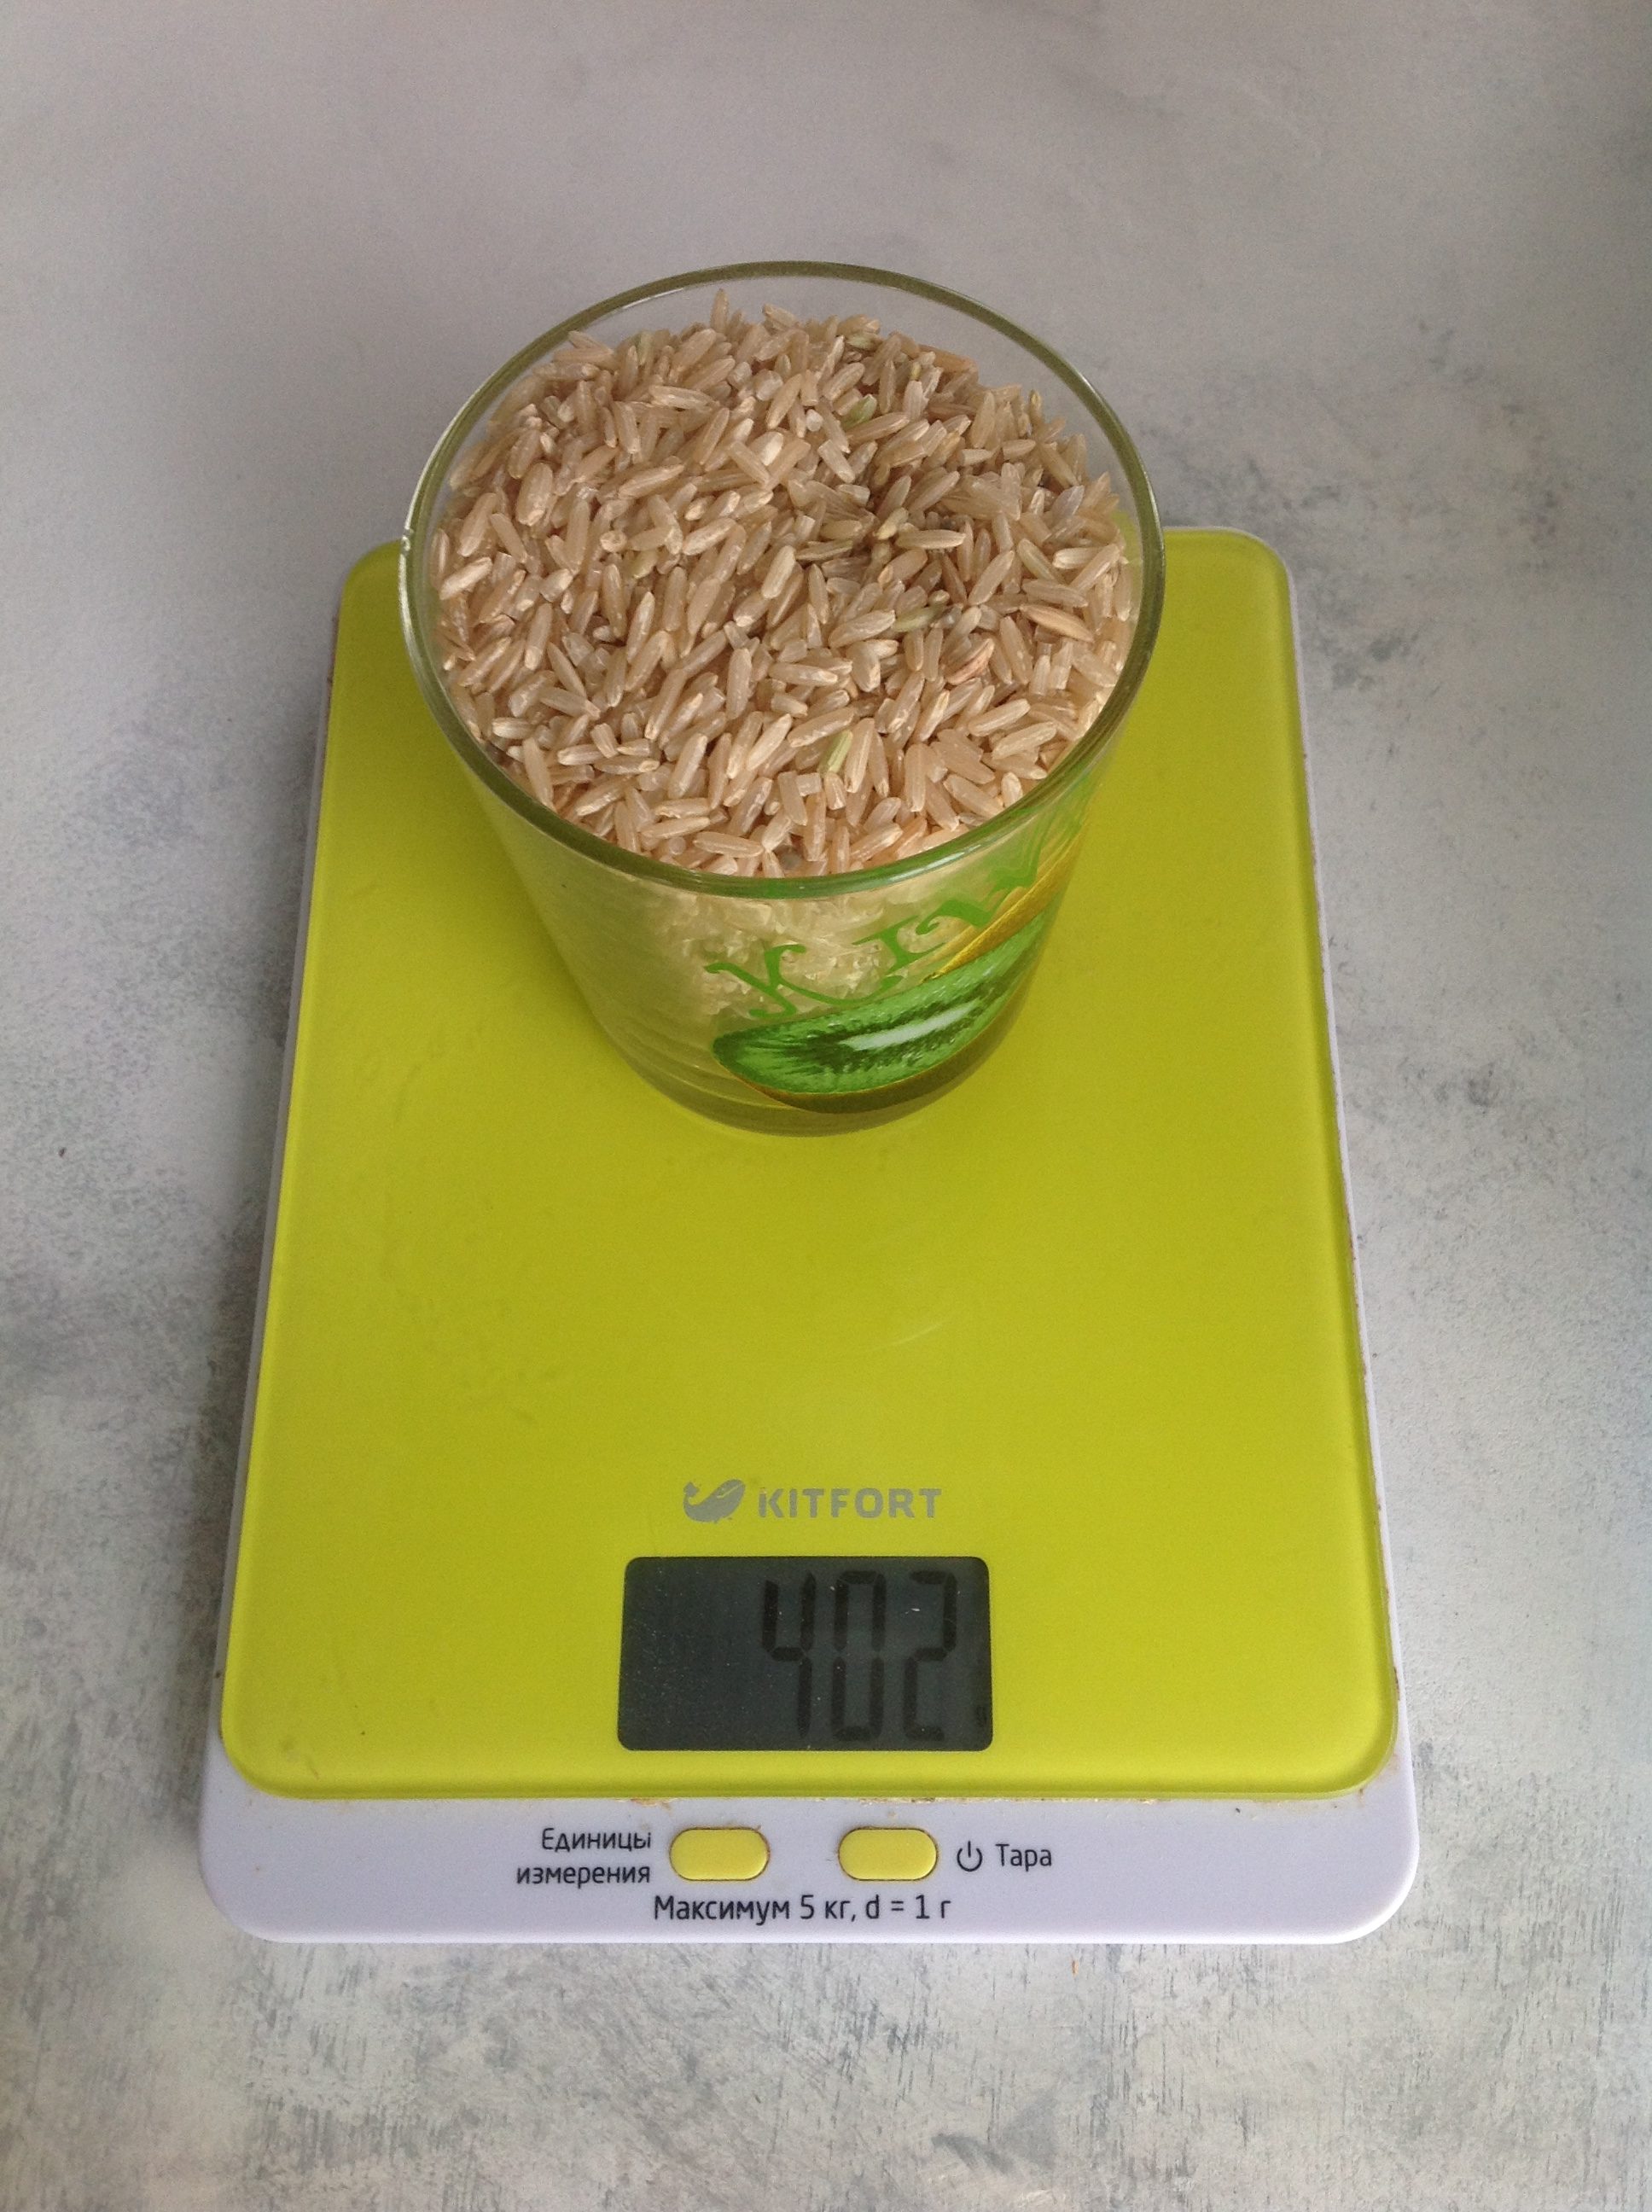 How much does brown dry rice weigh in a glass of 250 ml?